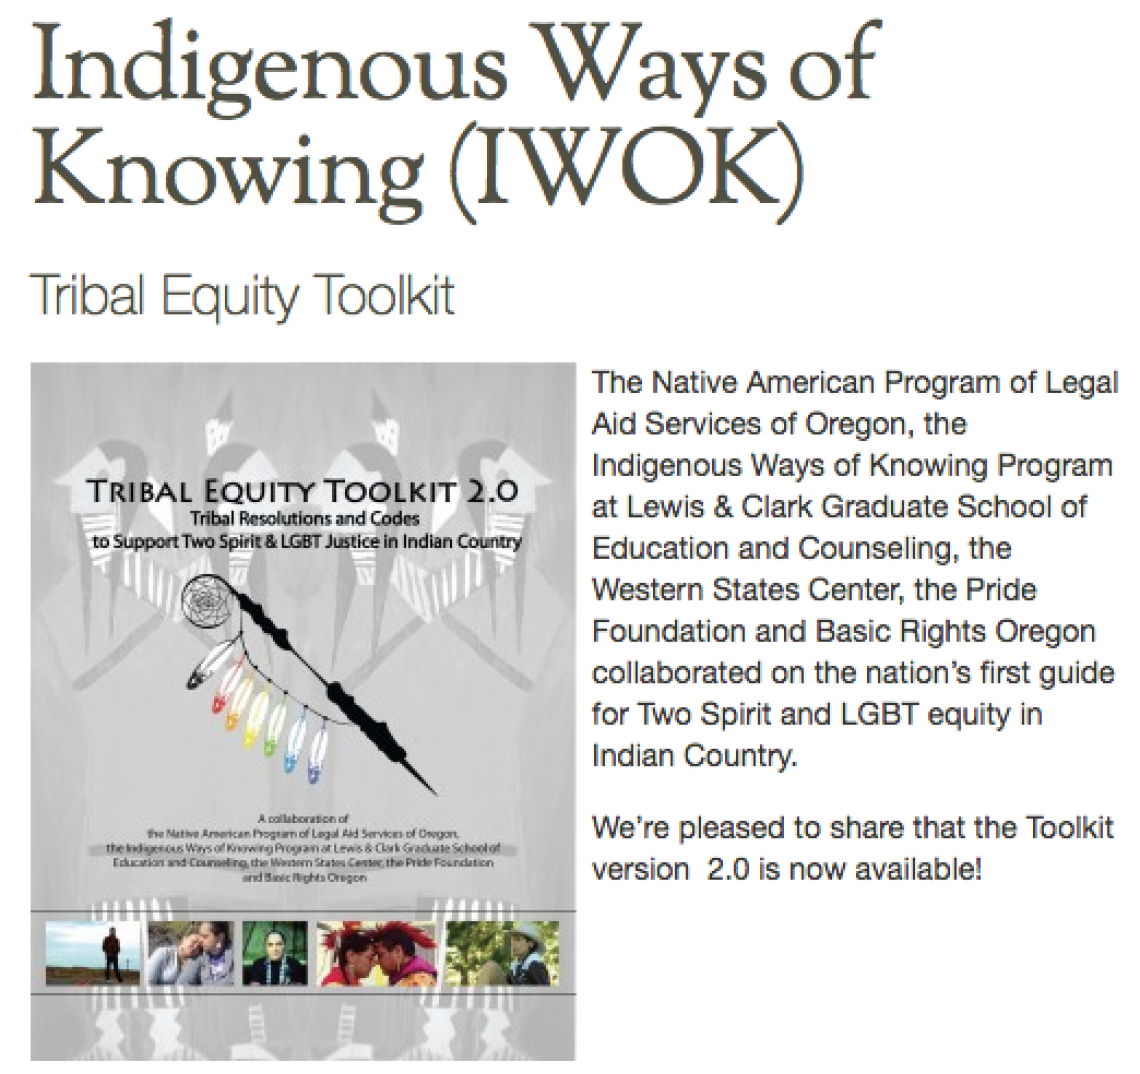 Tribal Equity Toolkit: Sample Tribal Resolutions and Codes to Support Two Spirit & LGBT Justice in Indian Country